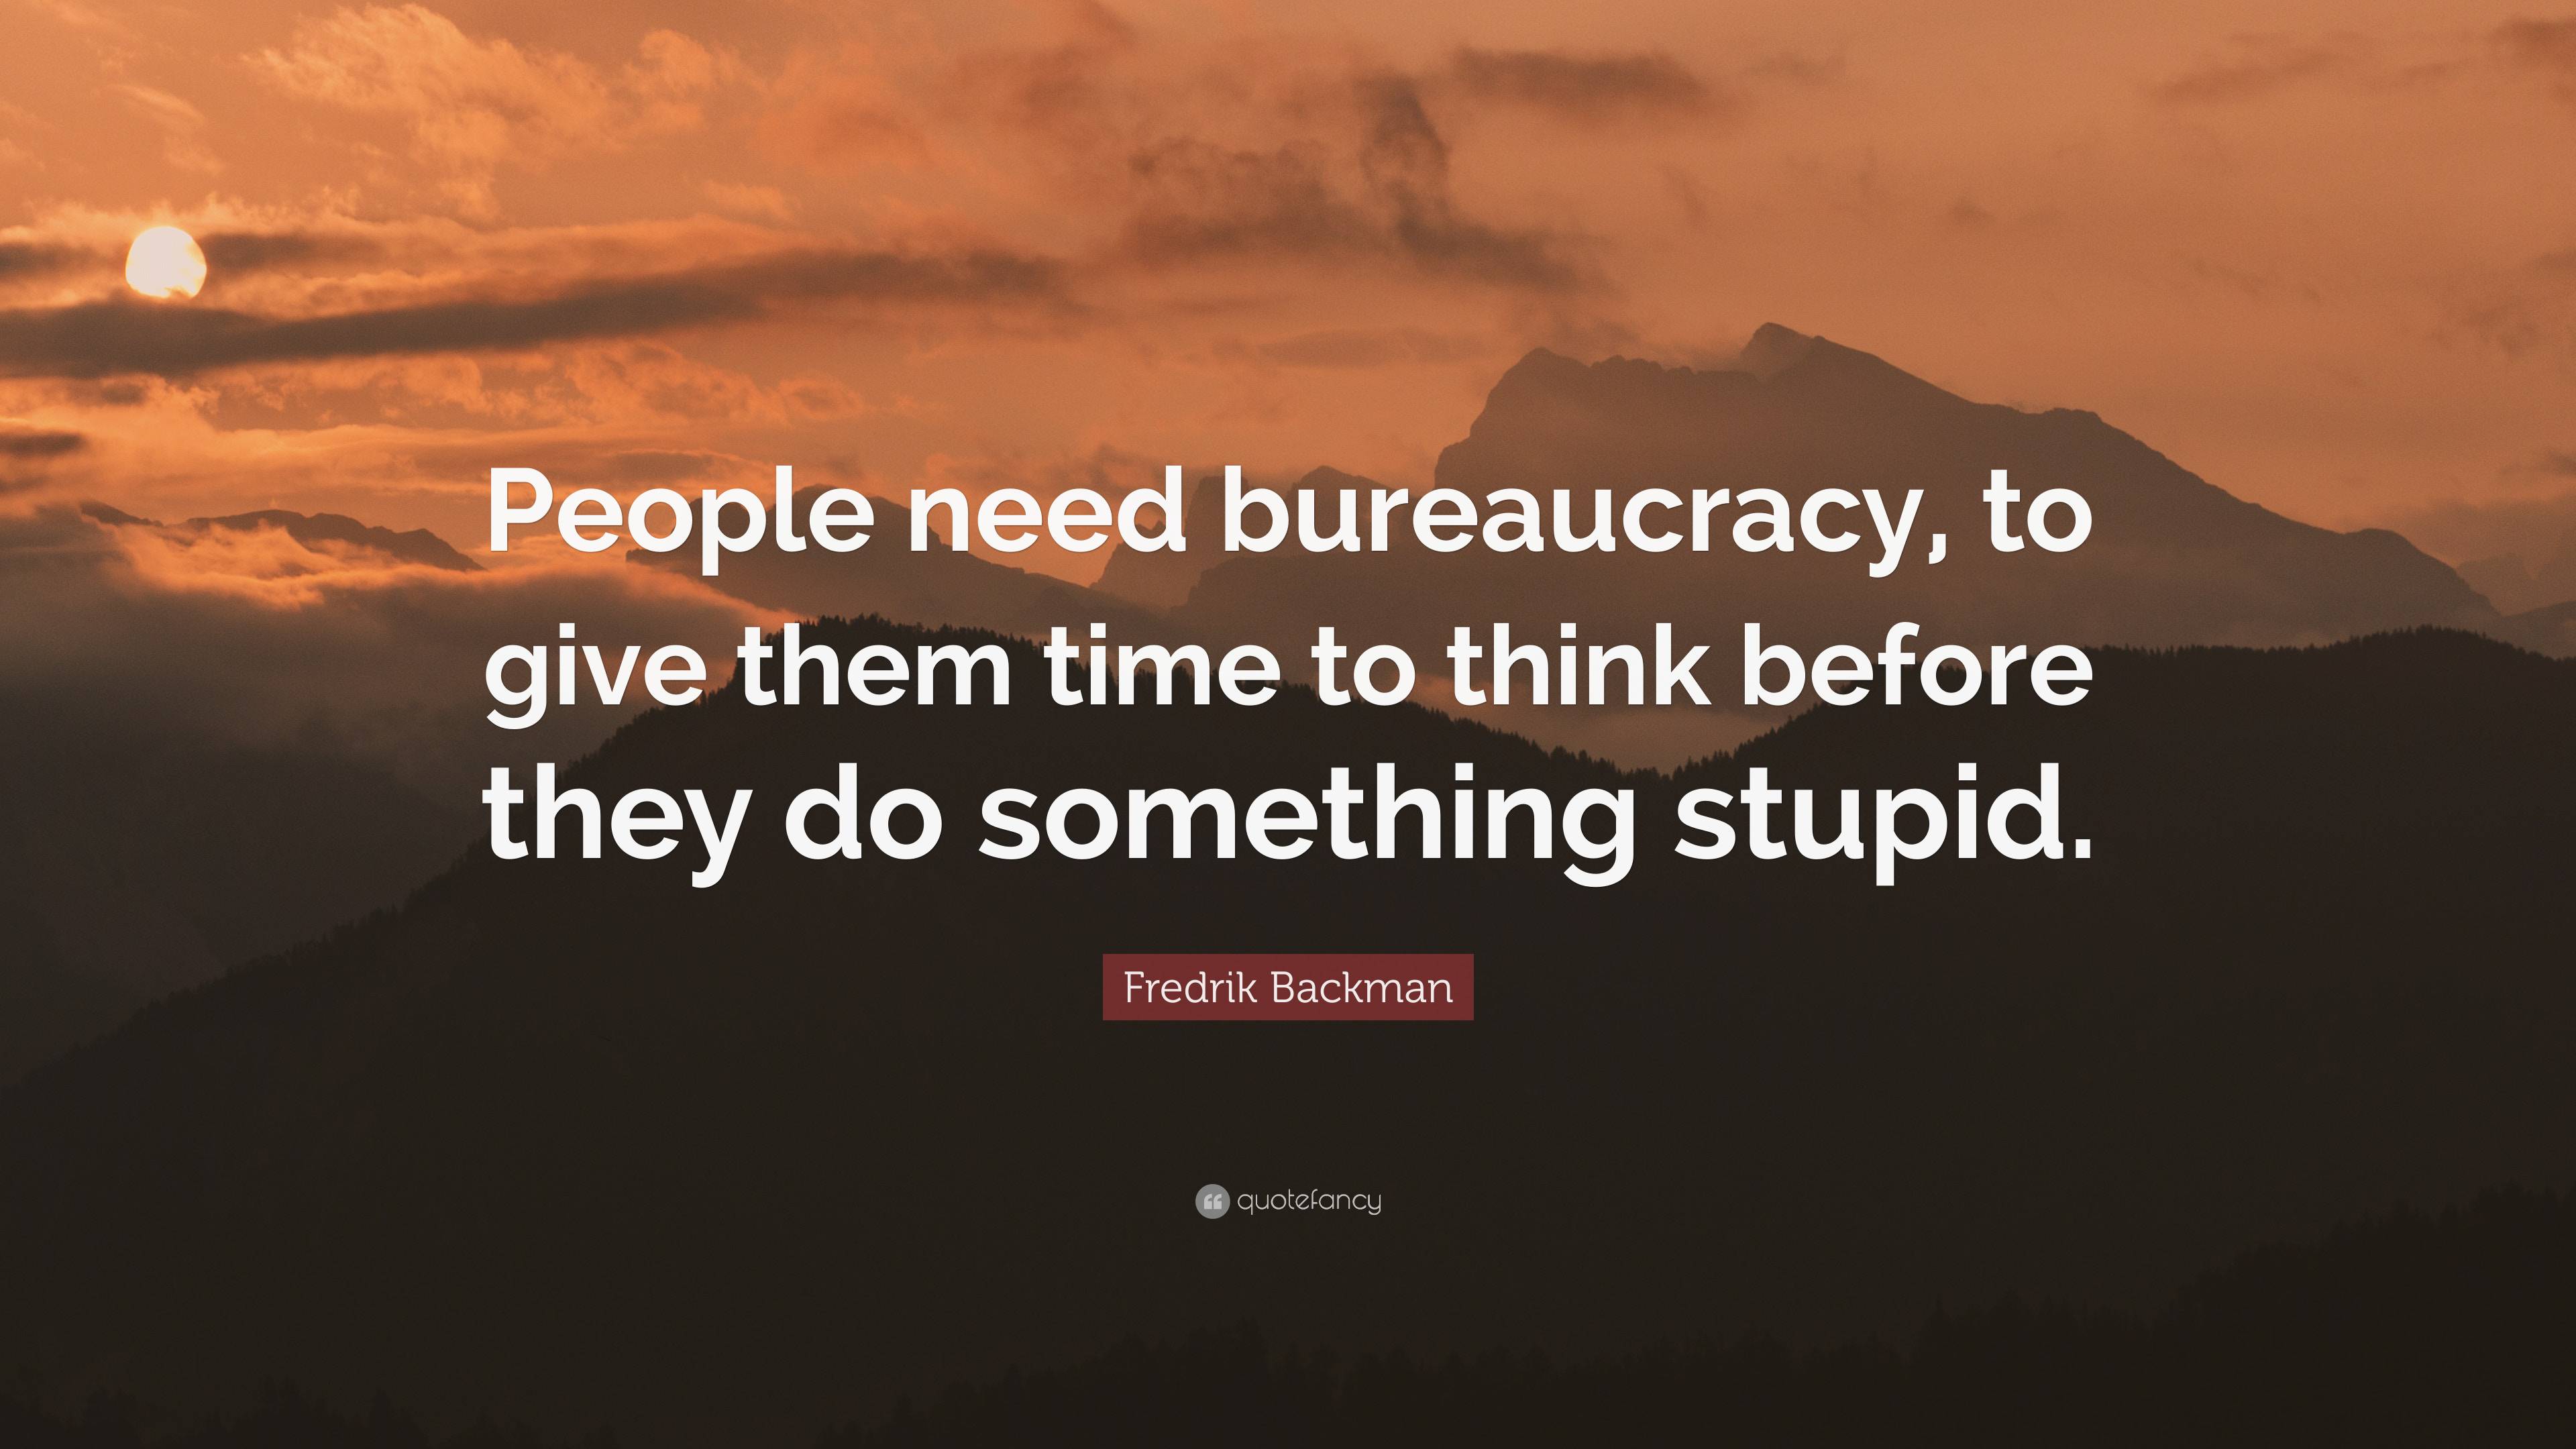 Fredrik Backman Quote: “People need bureaucracy, to give them time to ...